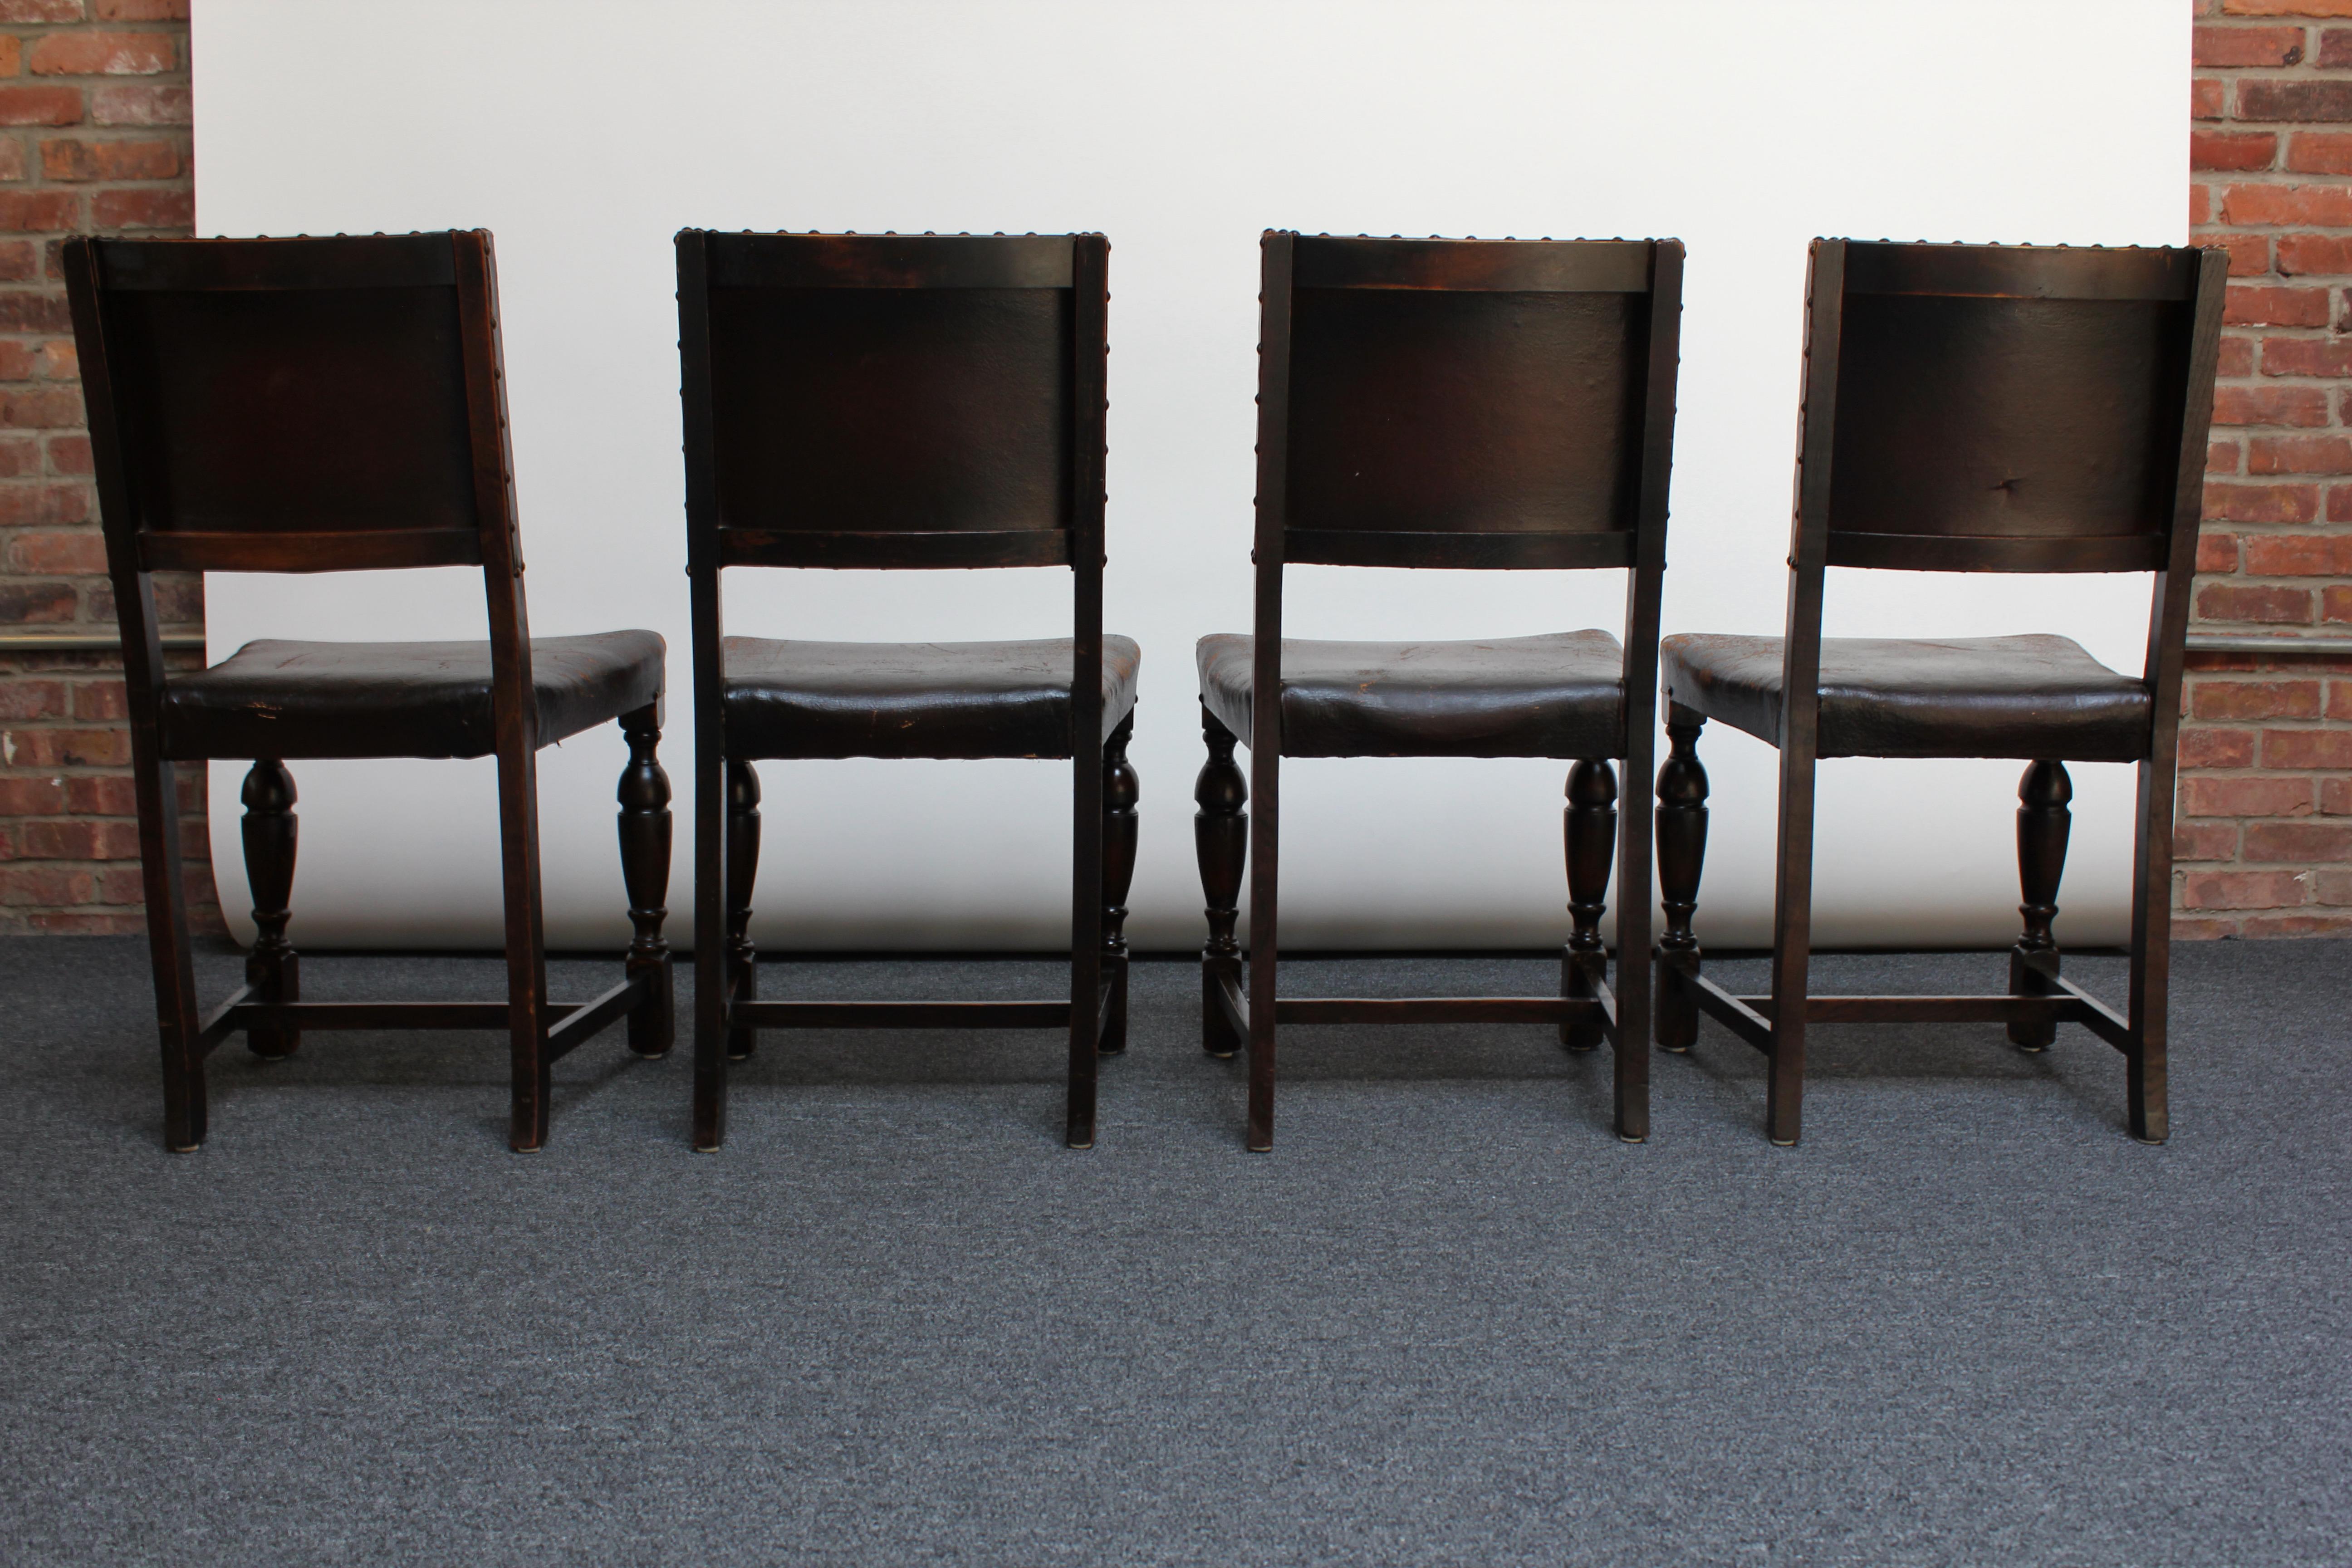 Mahogany Set of Four Vintage Spanish Revival Style Dining Chairs